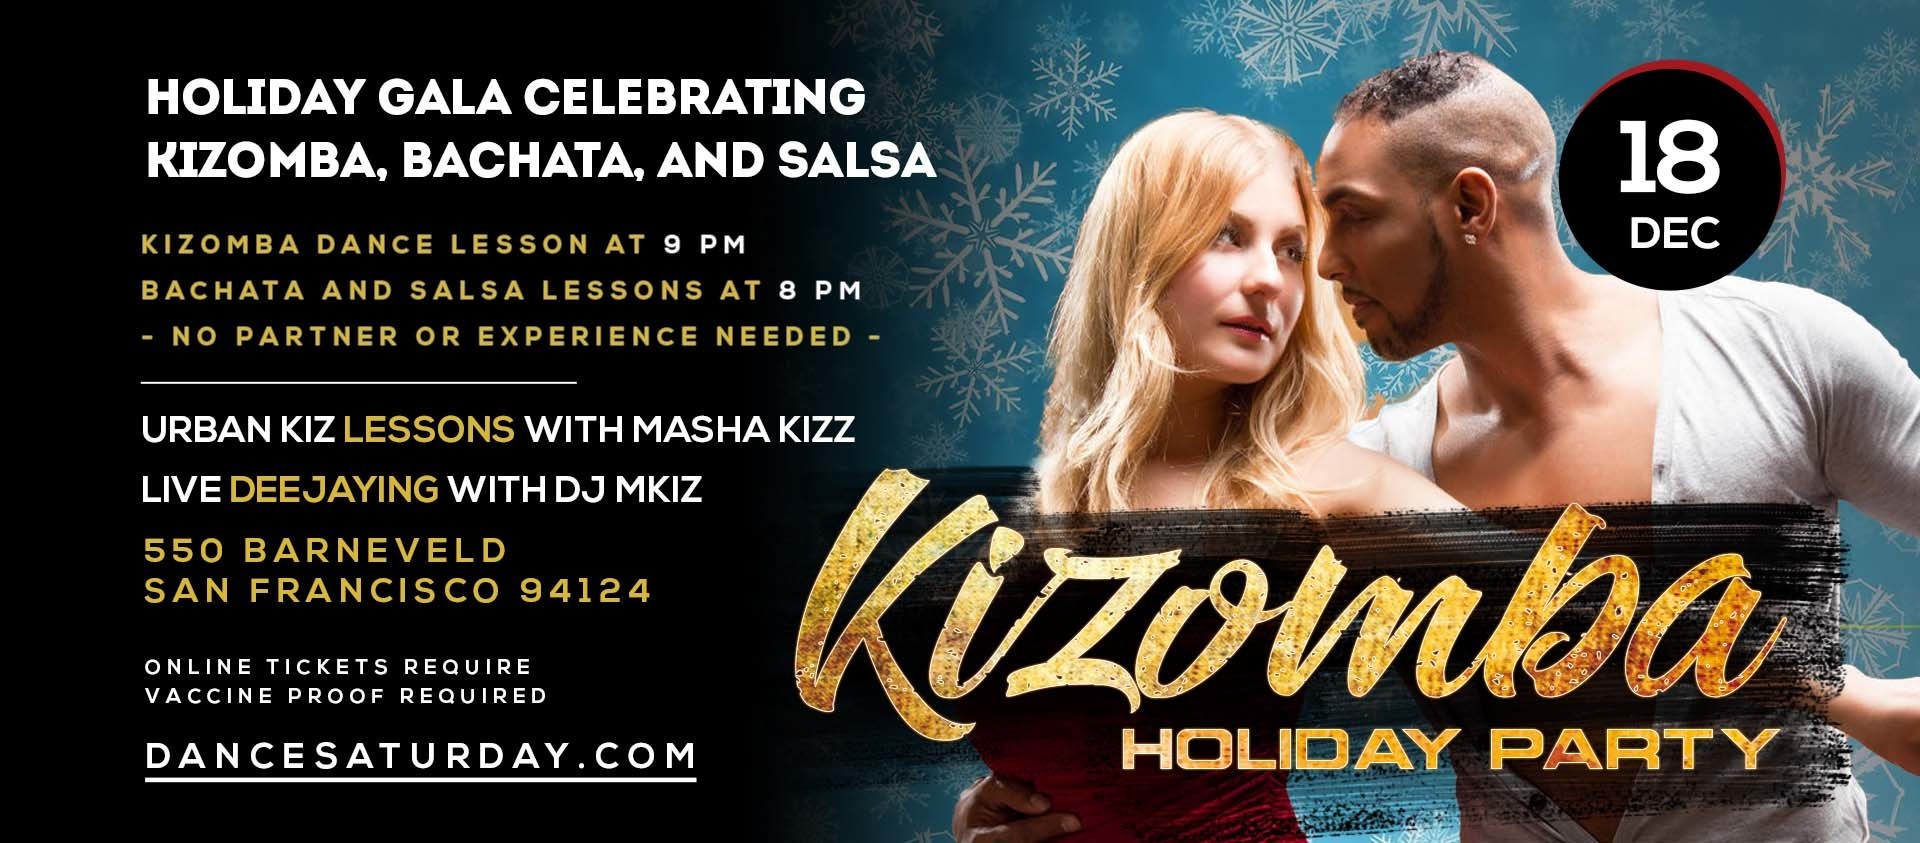 Dance Saturdays HOLIDAY PARTY BachataCrazy Nights, Salsa - Dance Lessons, San Francisco, California, United States